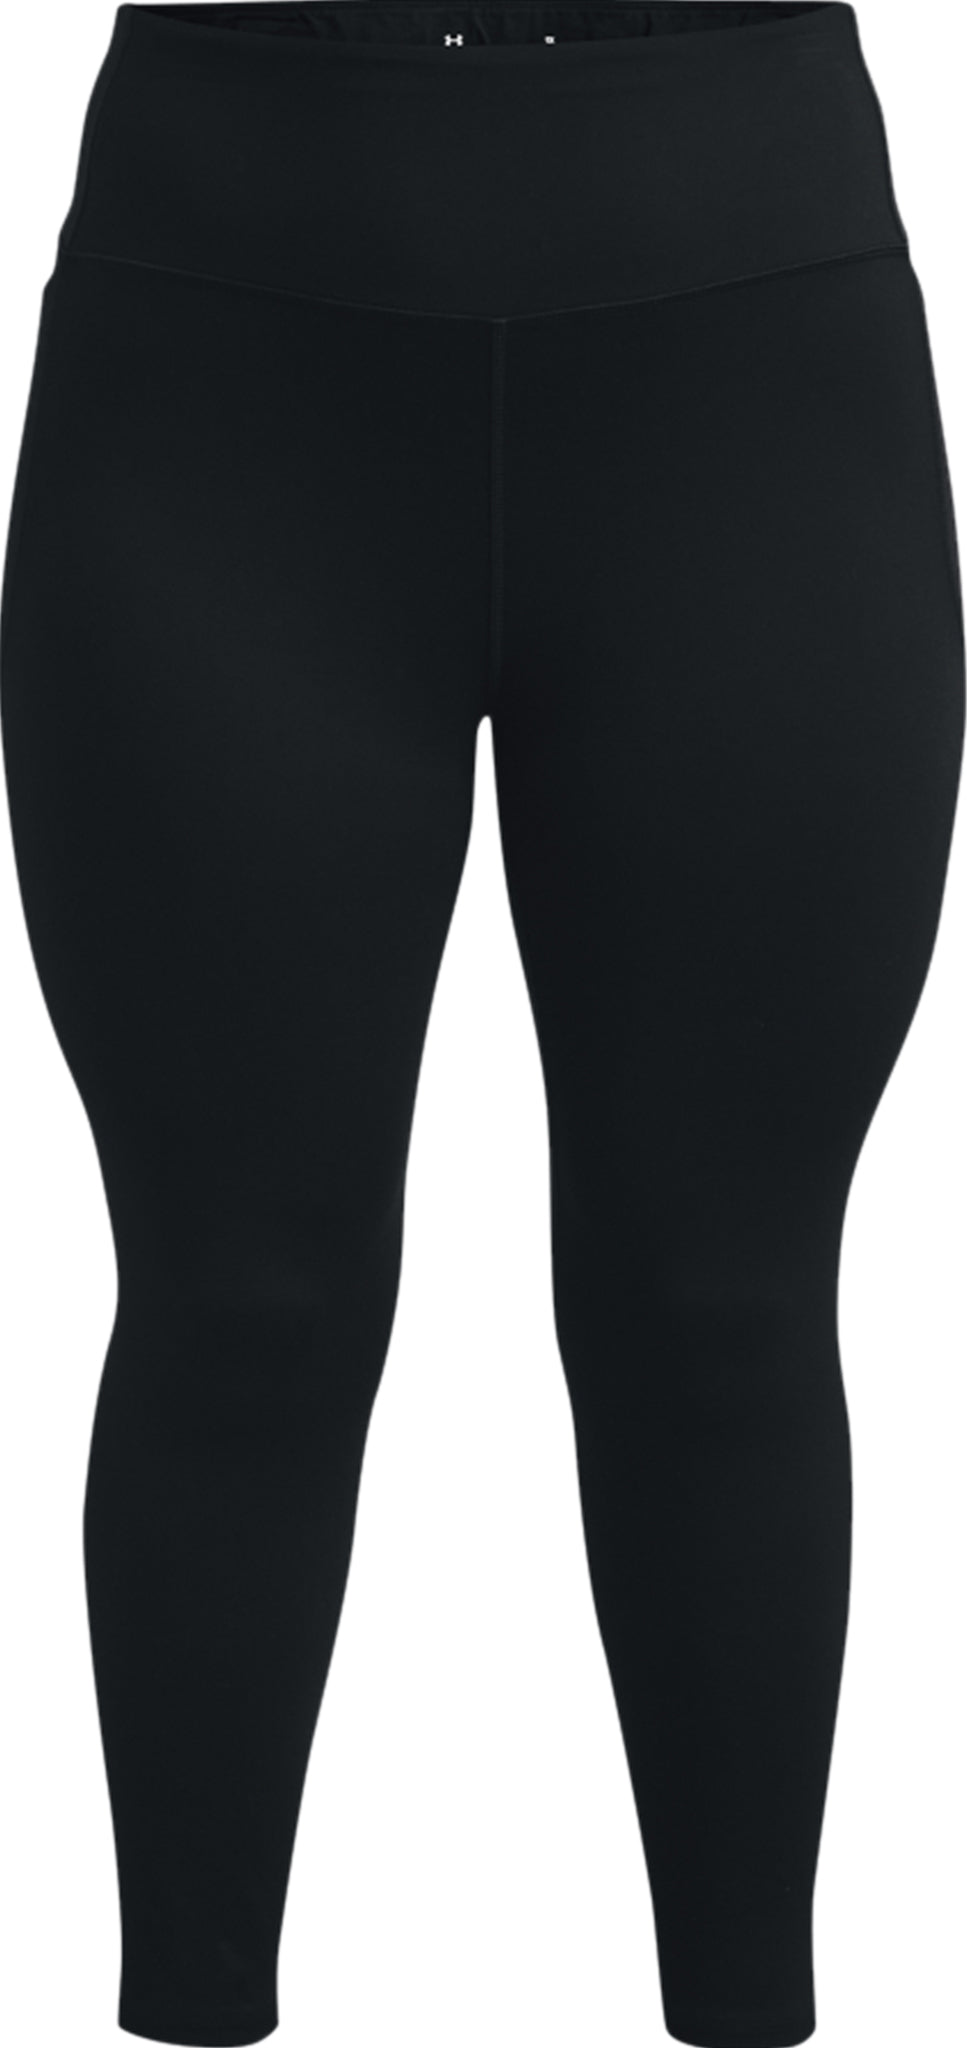 Women's Silver Shimmer Leggings Free and Plus Size